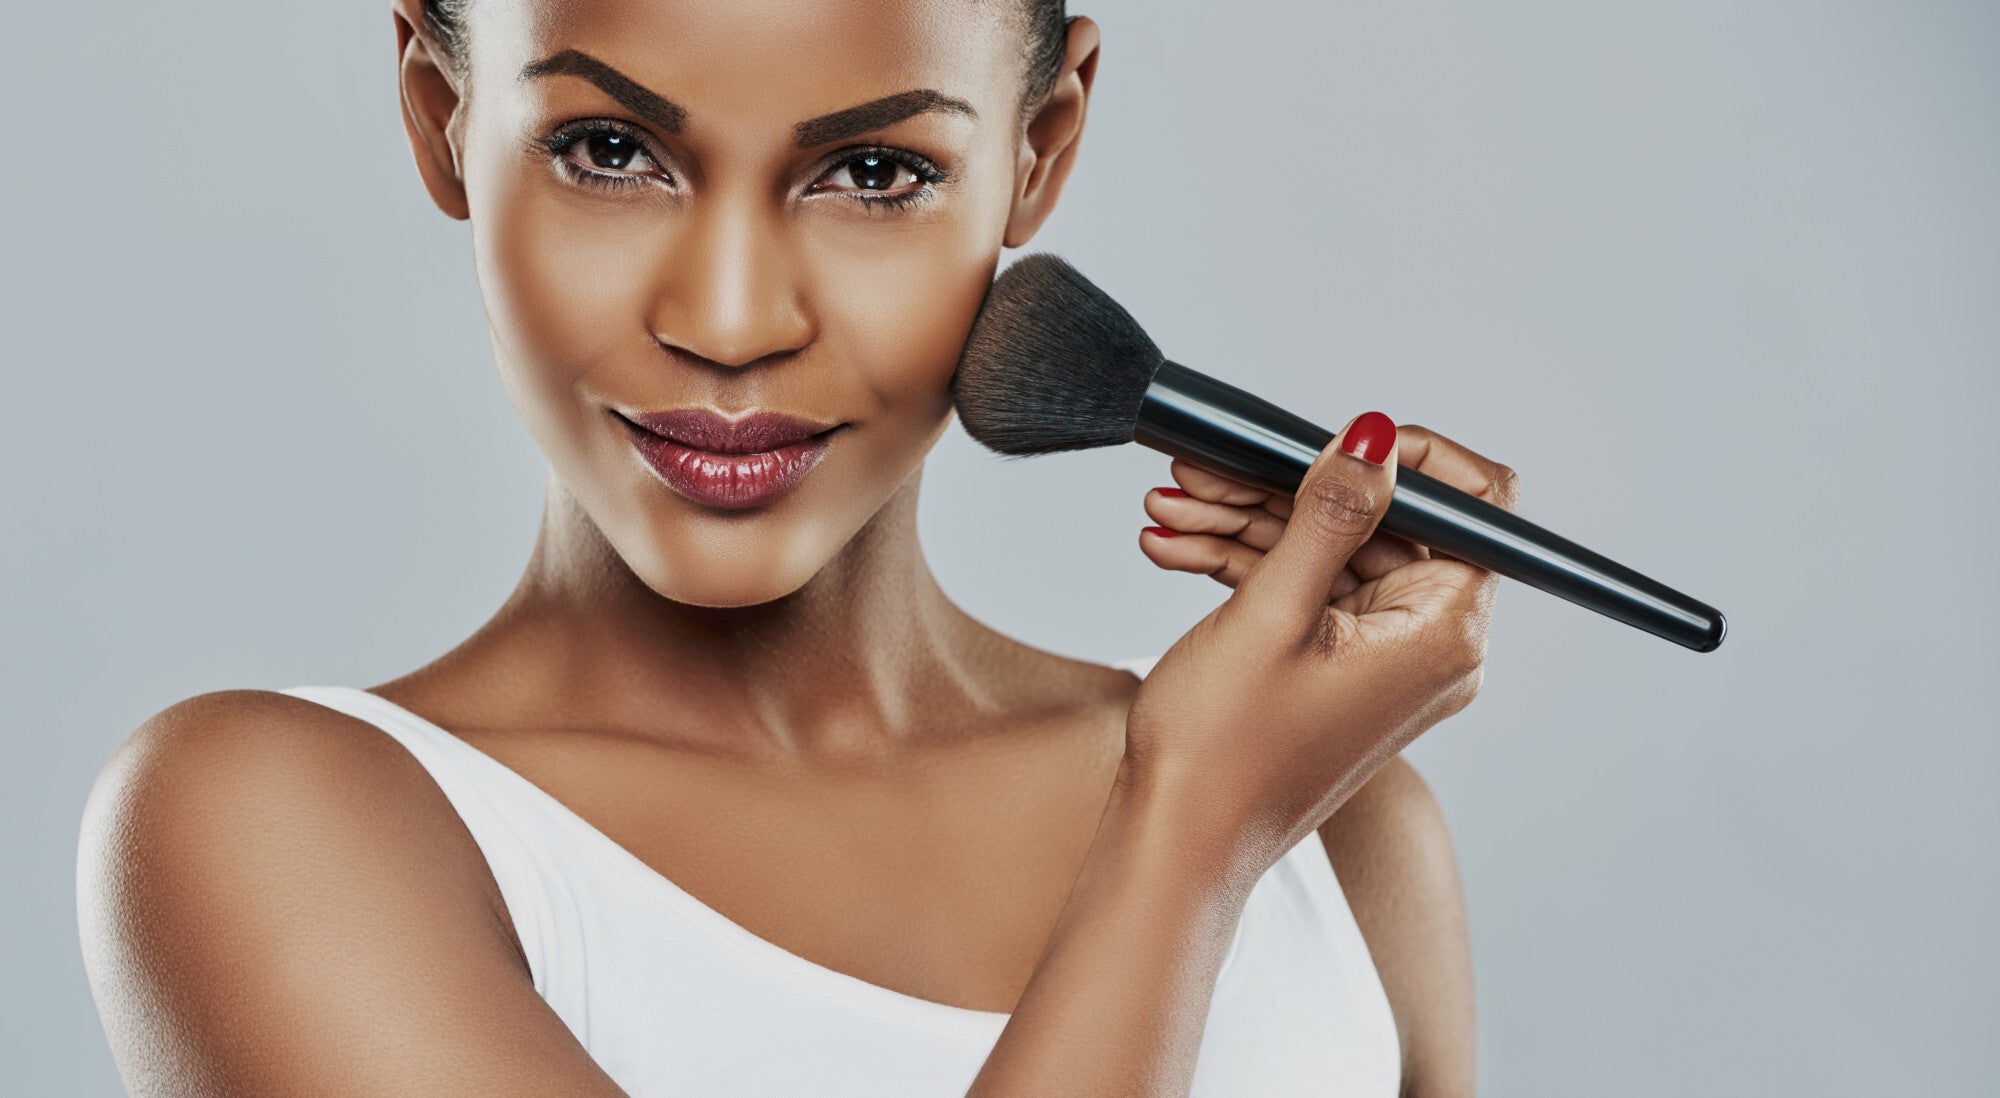 Makeup brushes THE GUIDE: How to choose the right ones - Beauty Collective